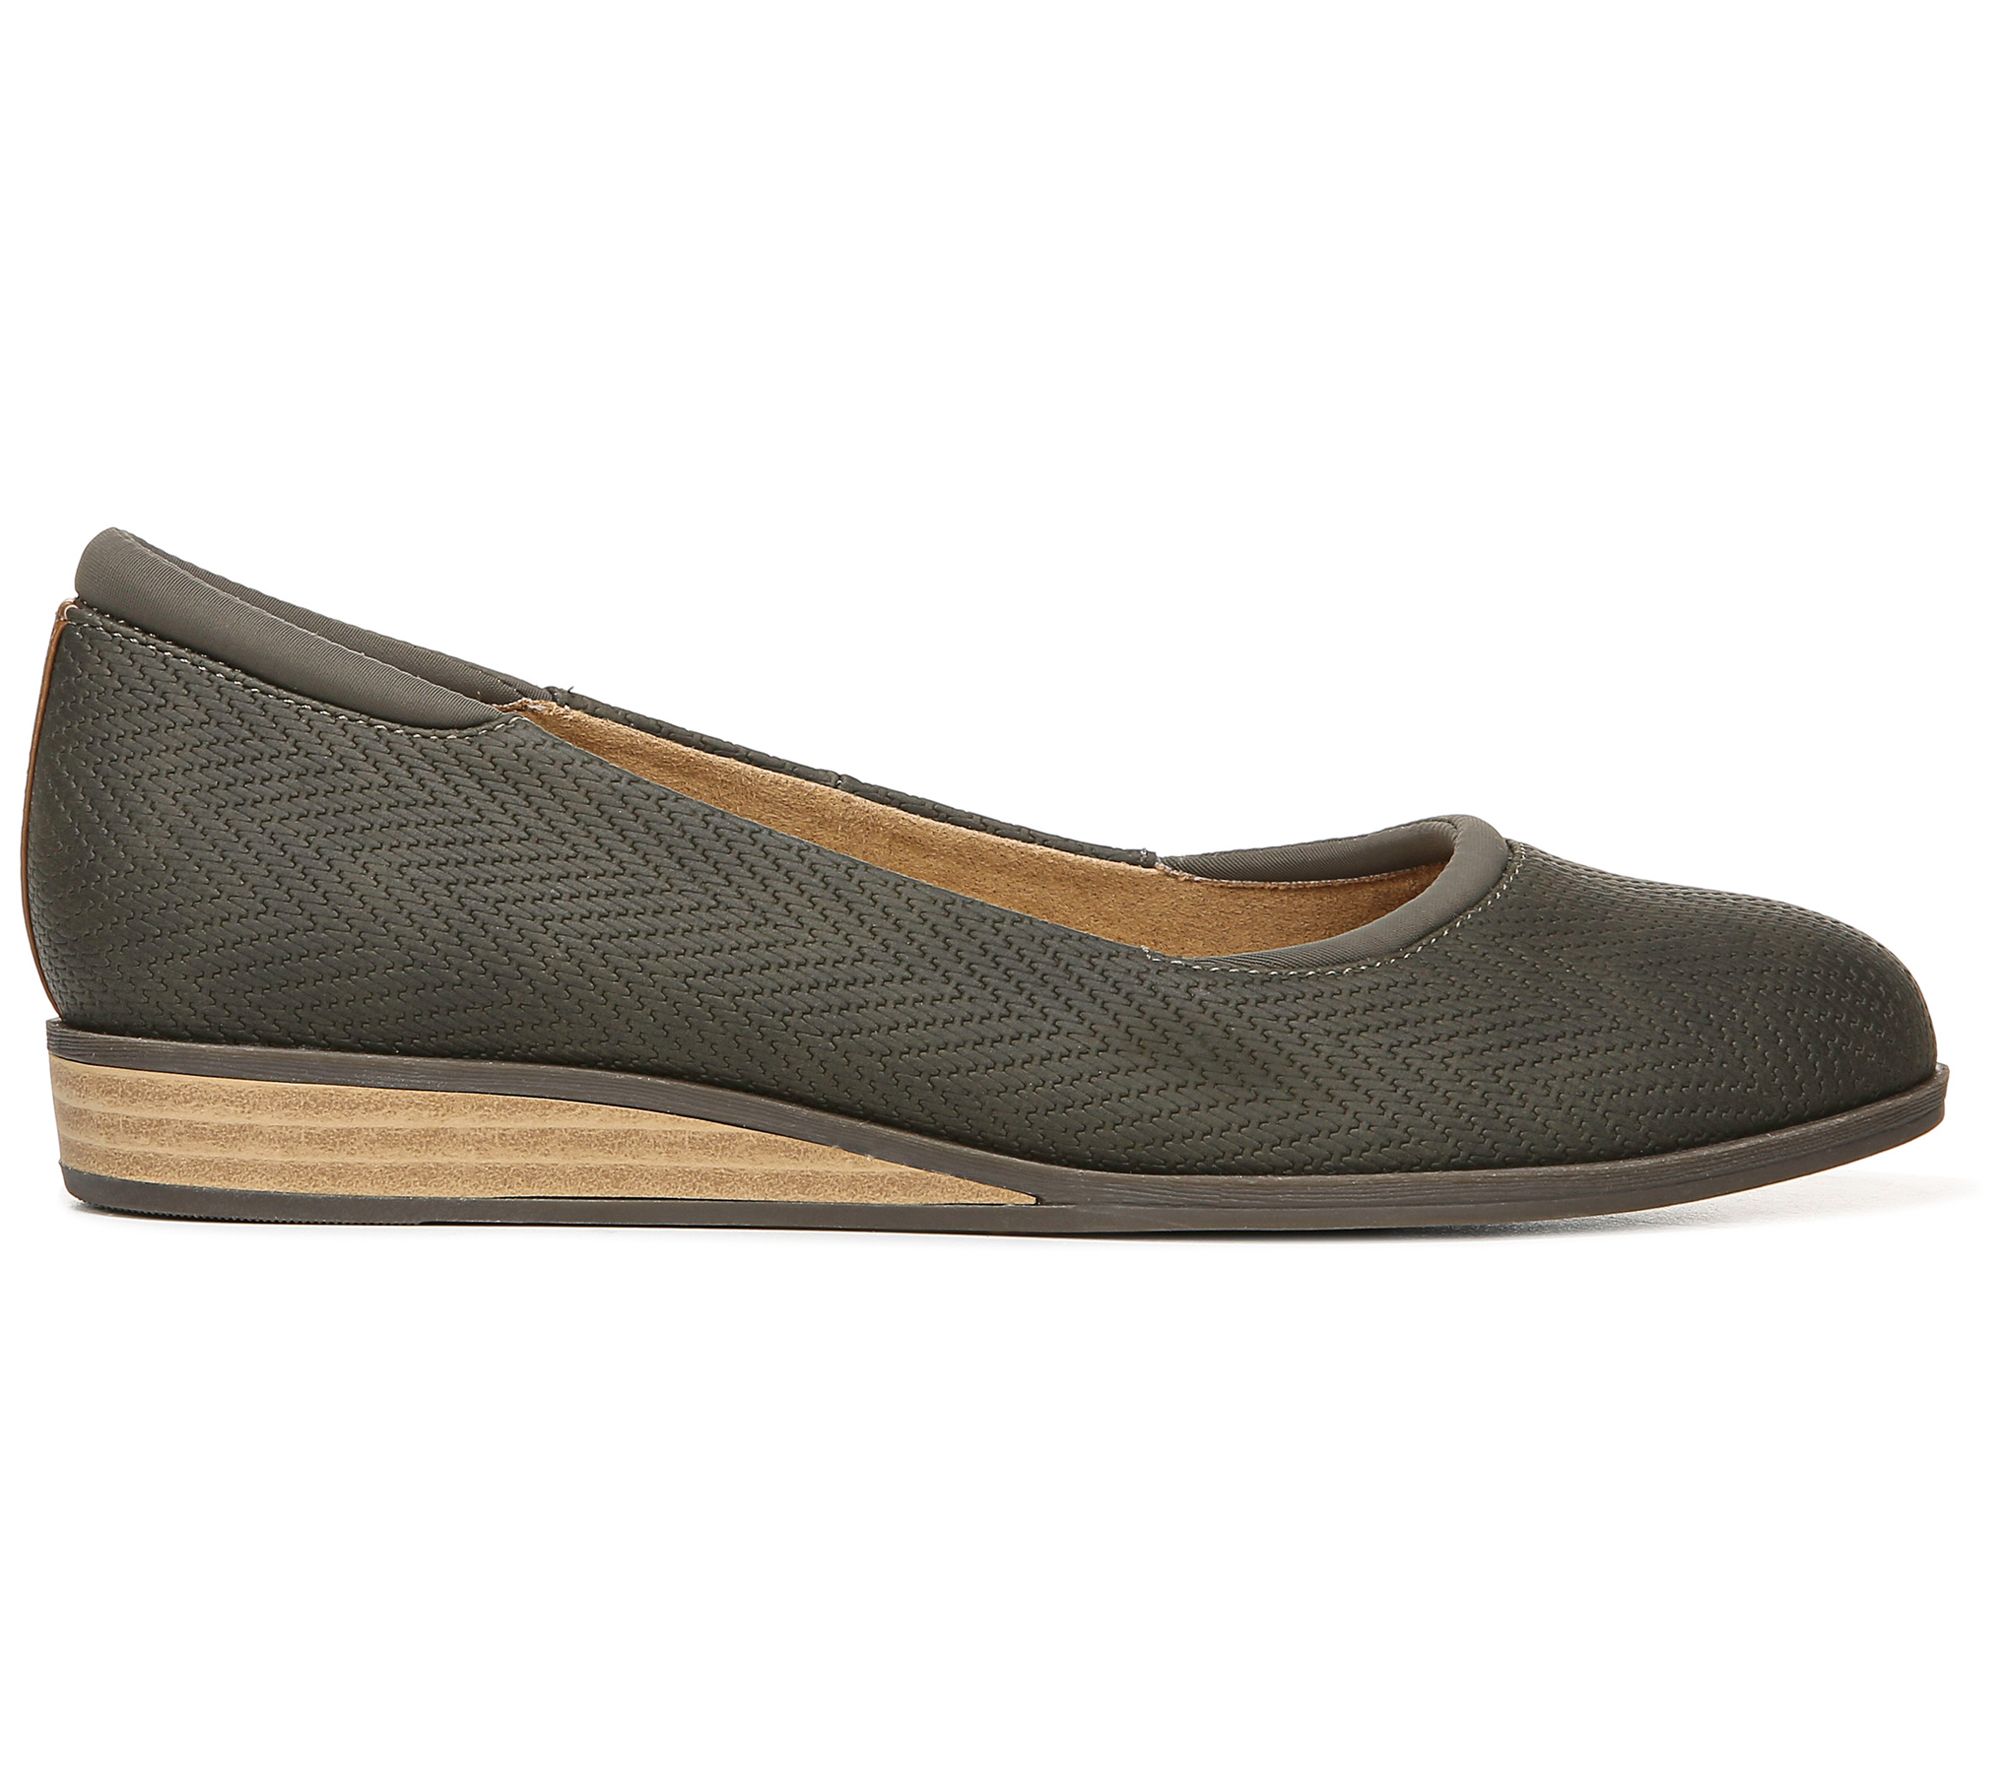 Dr. Scholl's Slip-On Loafers - Depth - QVC.com